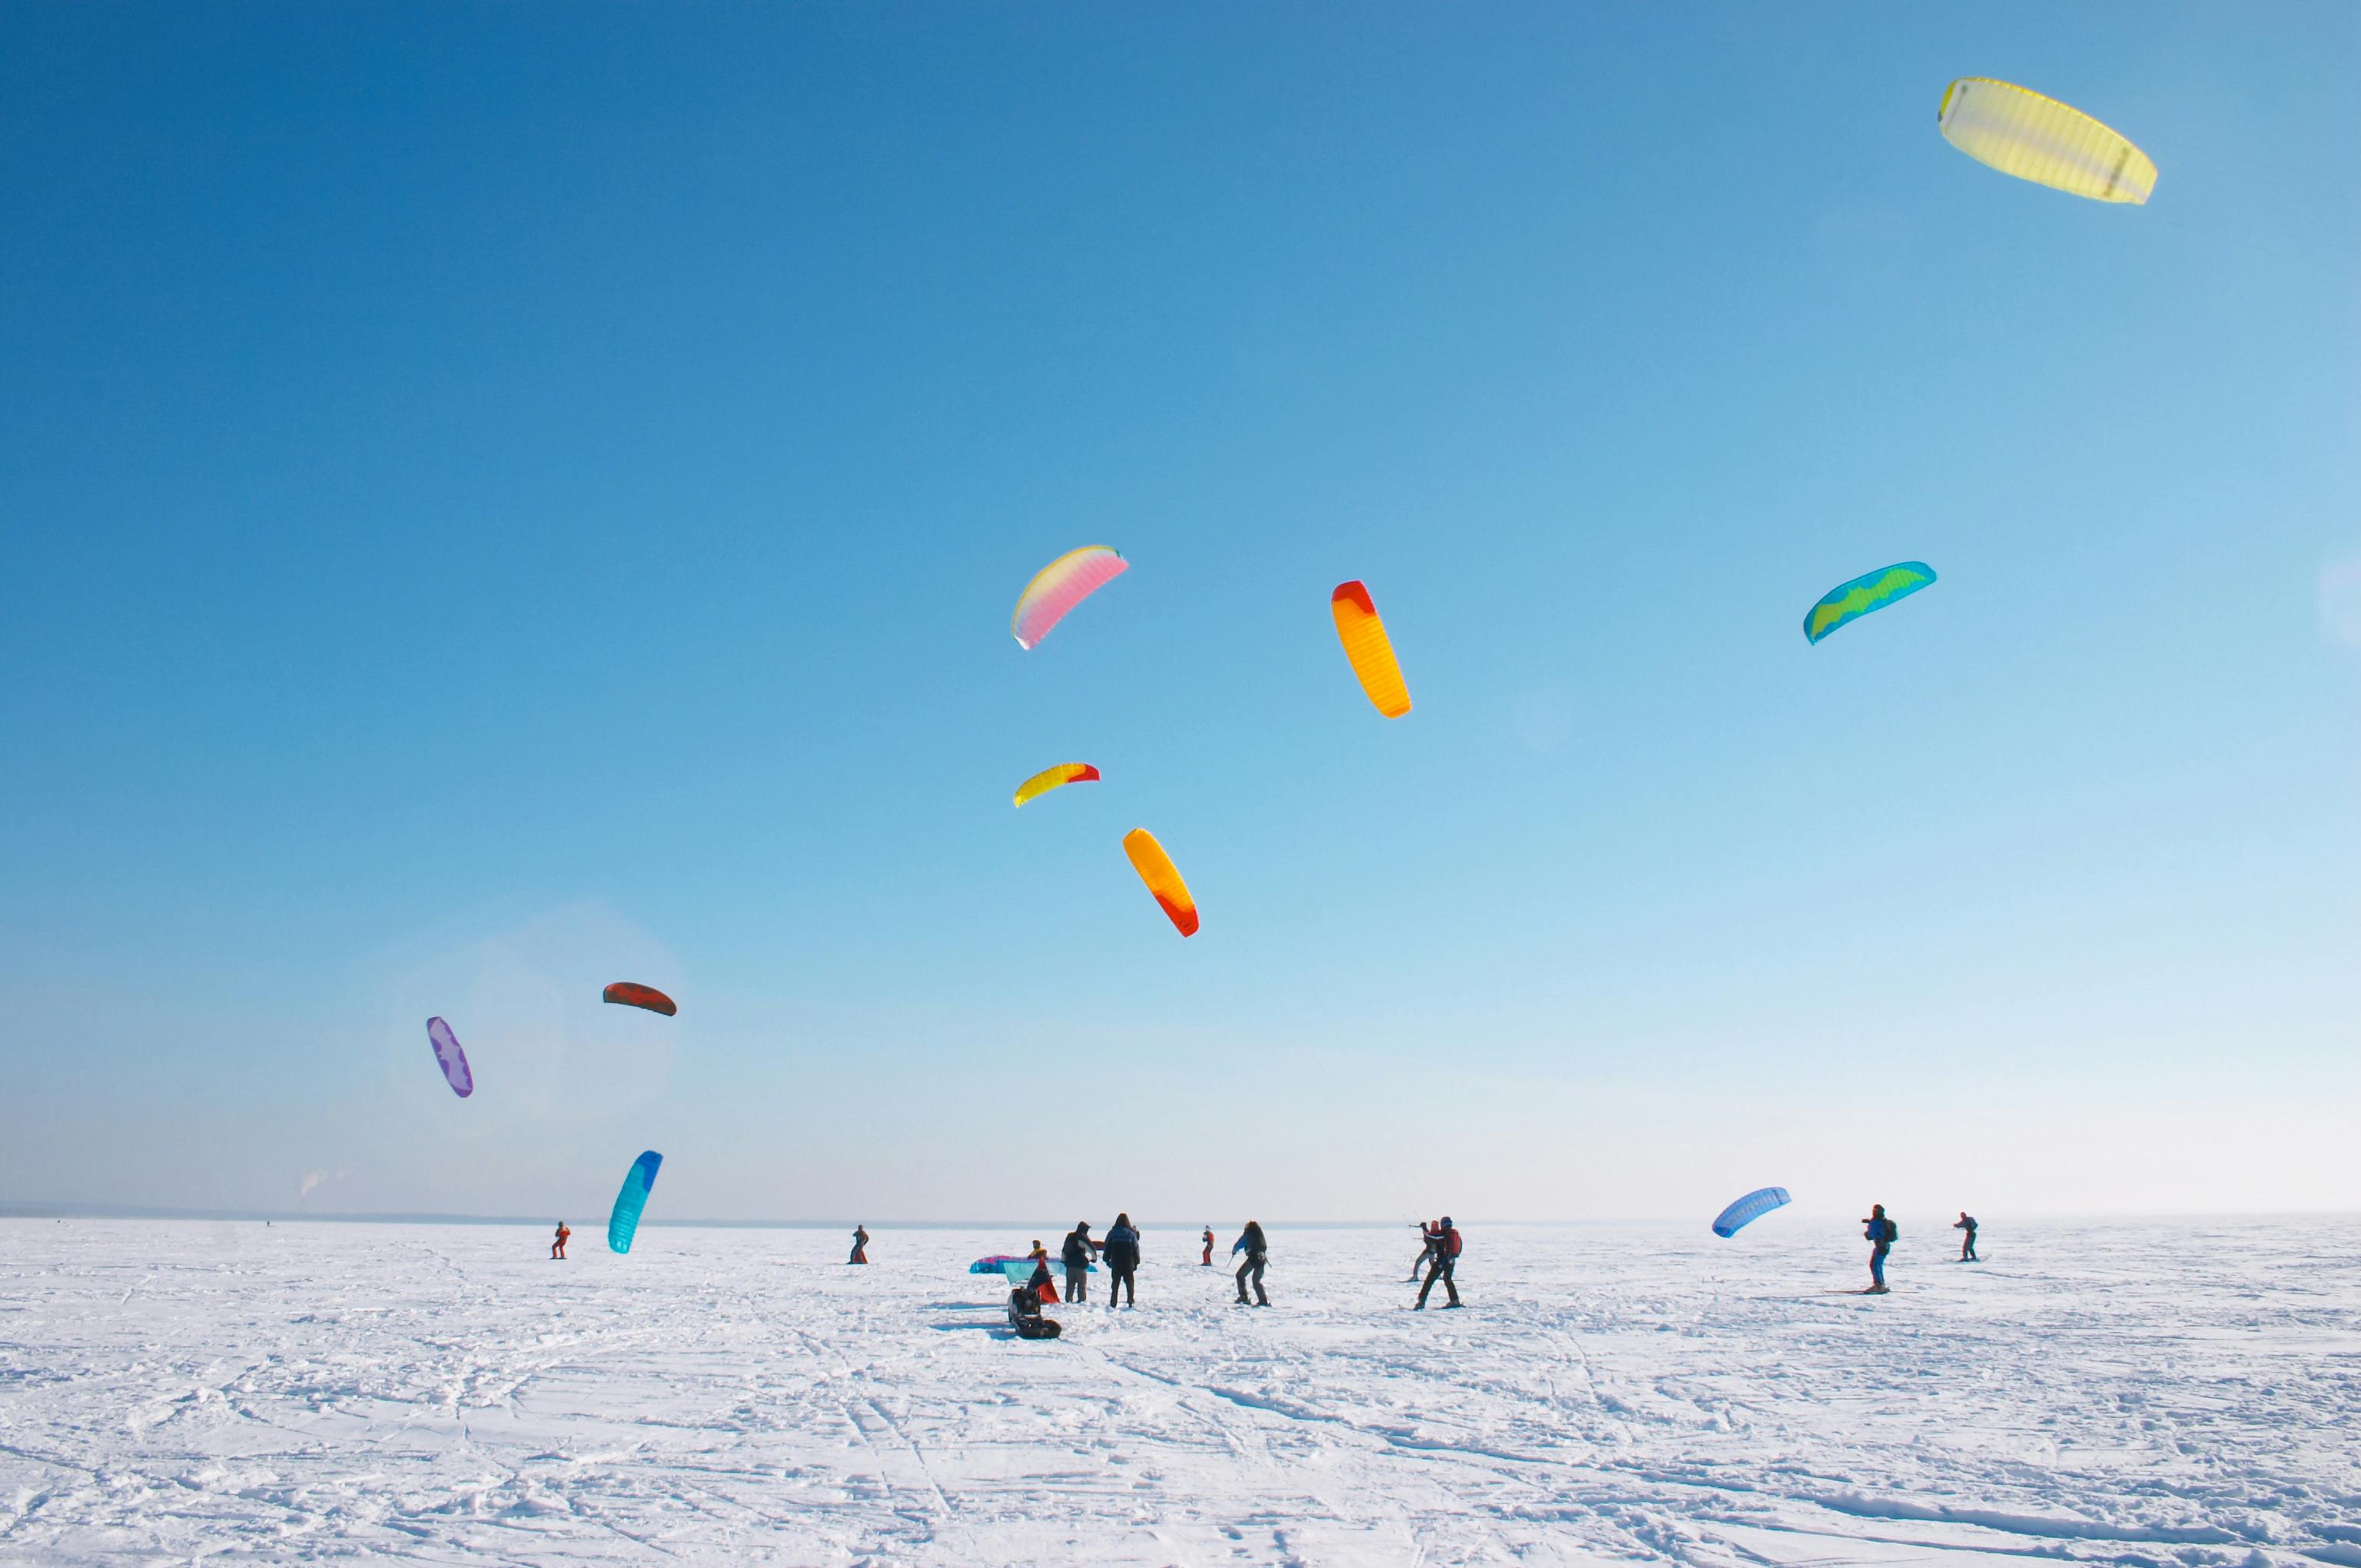 Is snow kiting easy to learn